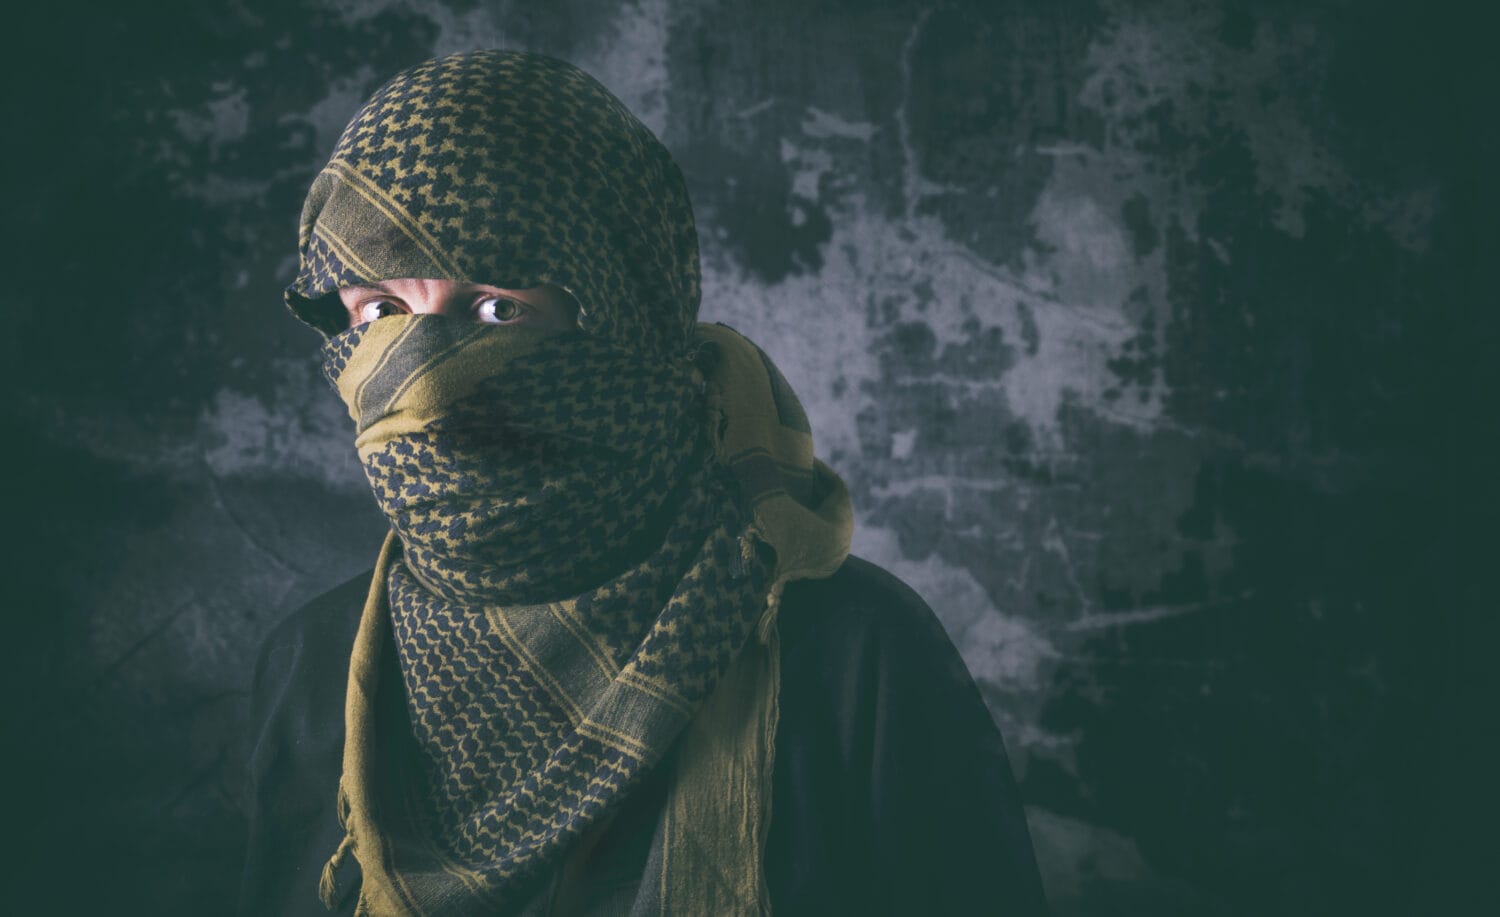 Masked terrorist with tactical Shemagh scarf and treating look with grungy background. Concept of terrorism and violence.